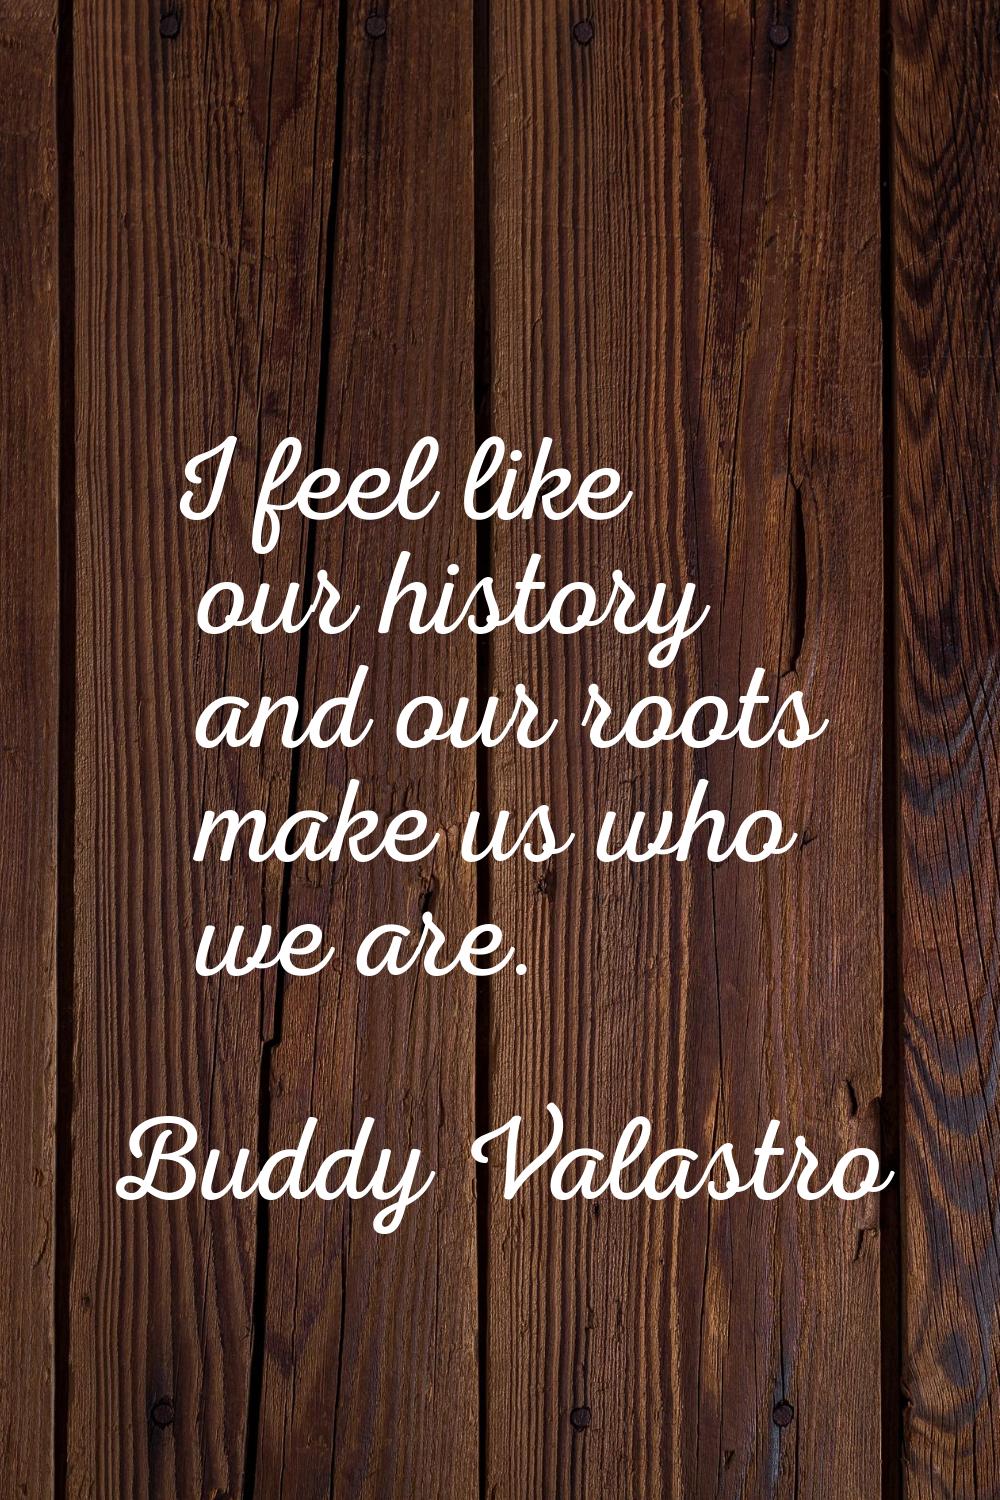 I feel like our history and our roots make us who we are.